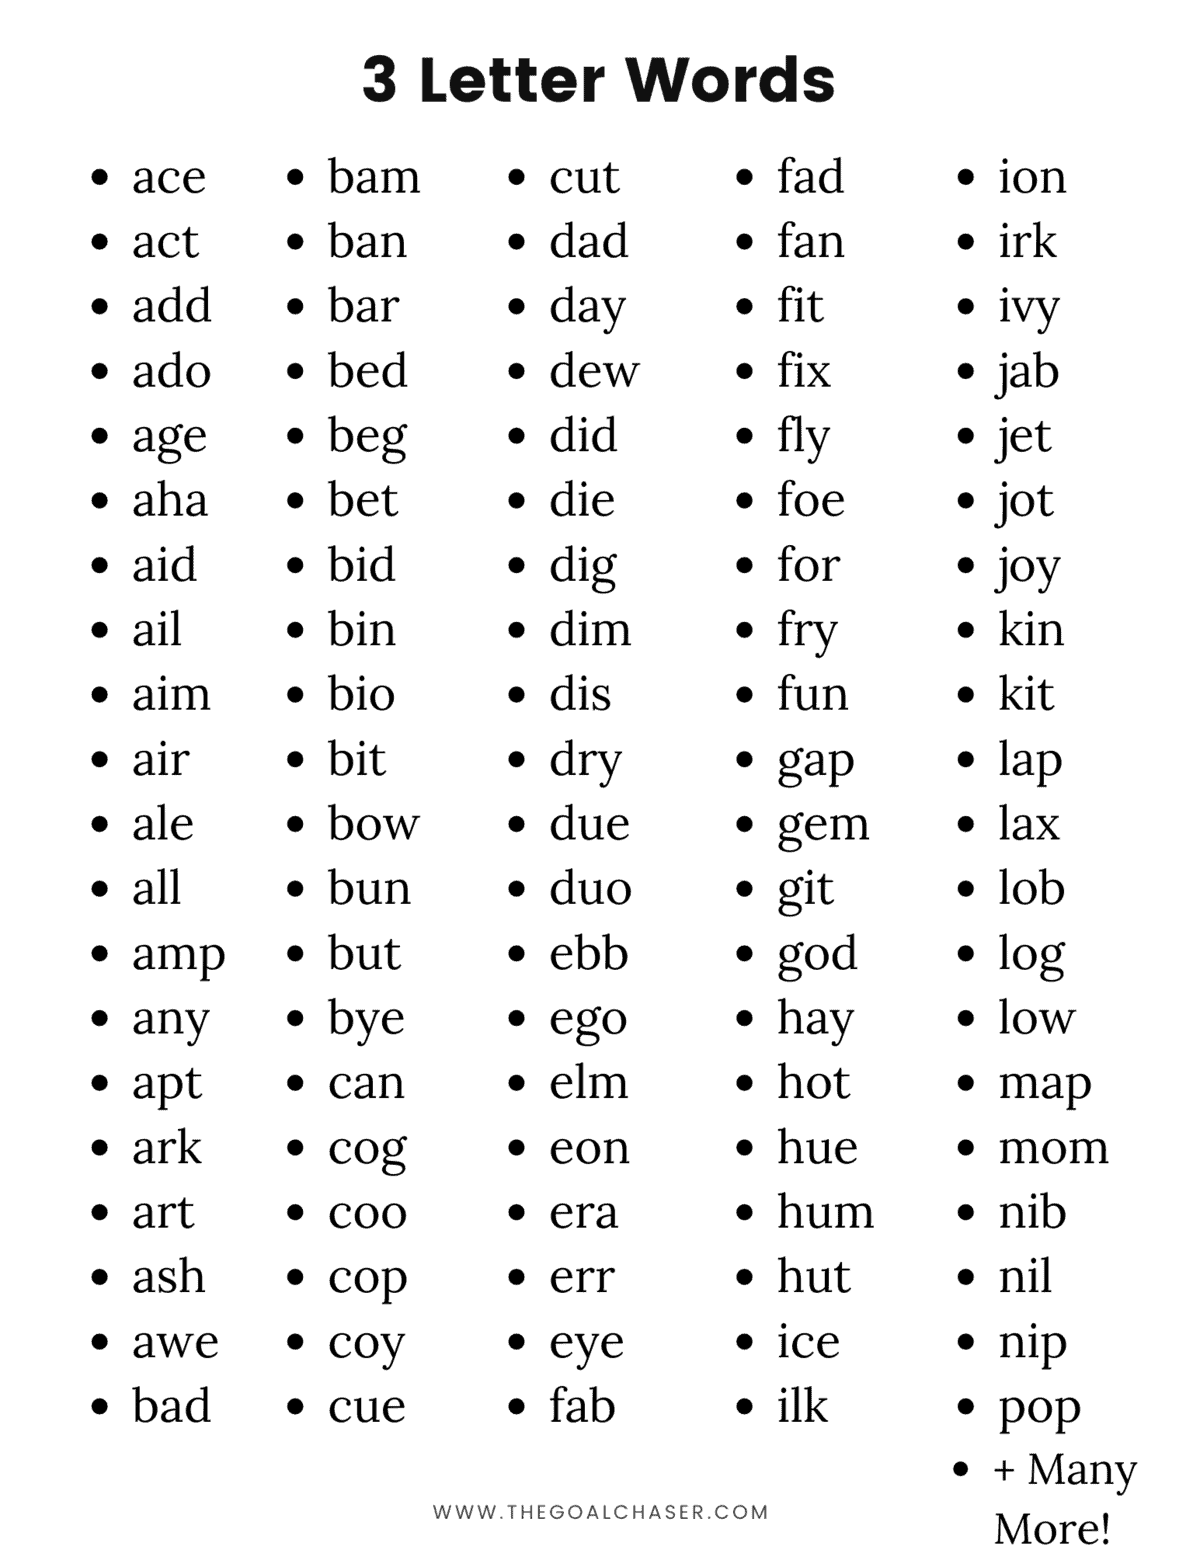 3 Letter Words In English List